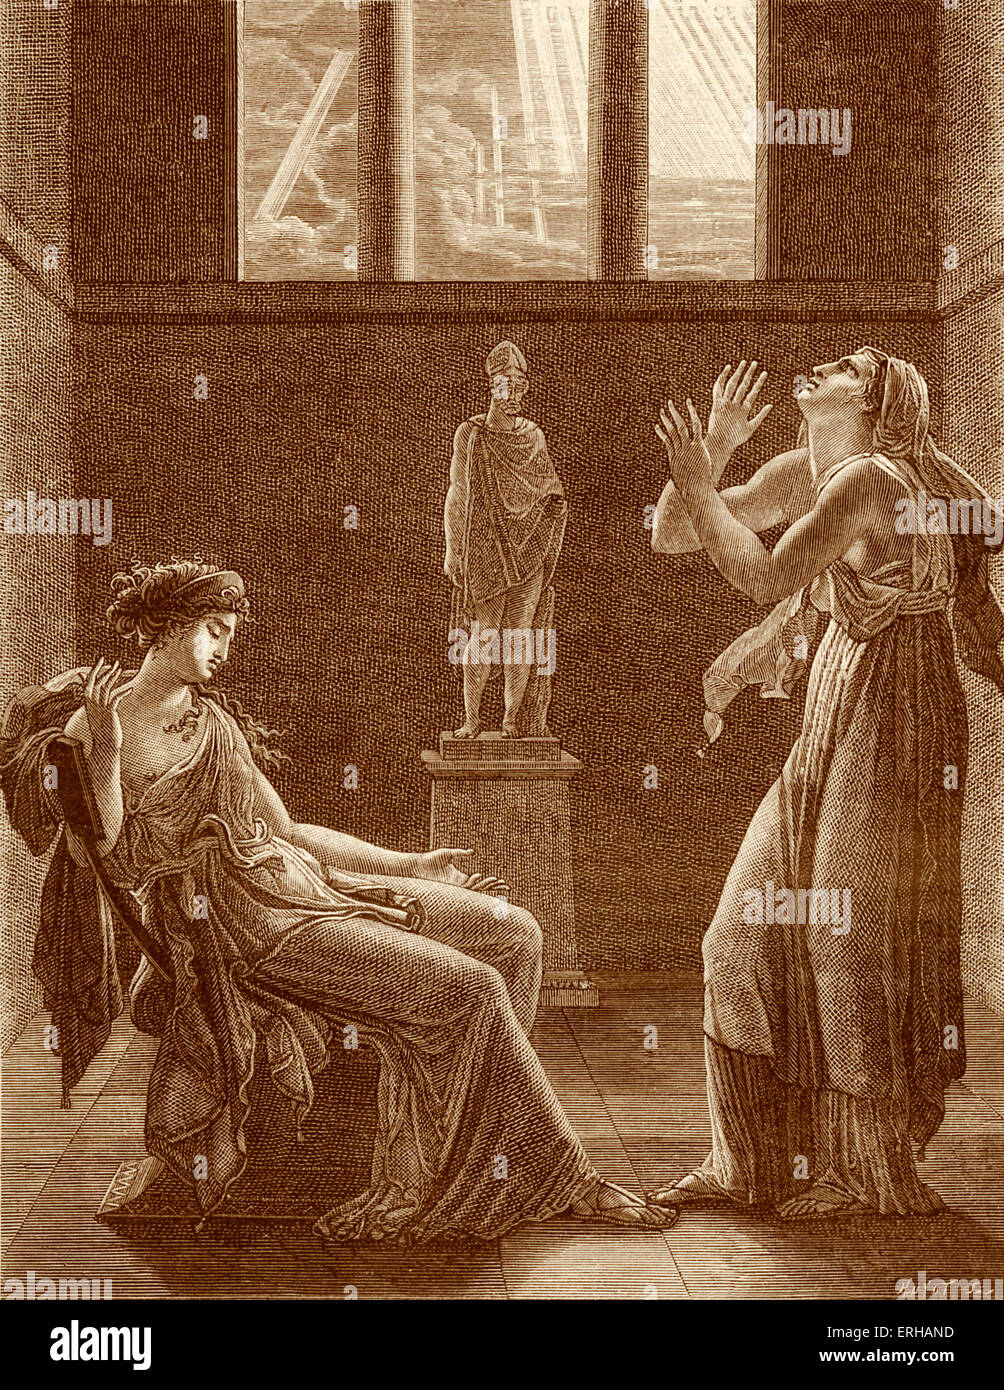 Phèdre - play by Jean Racine. From engraving of scene showing Phèdre  (Phaedra) and her confidant Œnone (Oenone) during Act 1 Stock Photo - Alamy